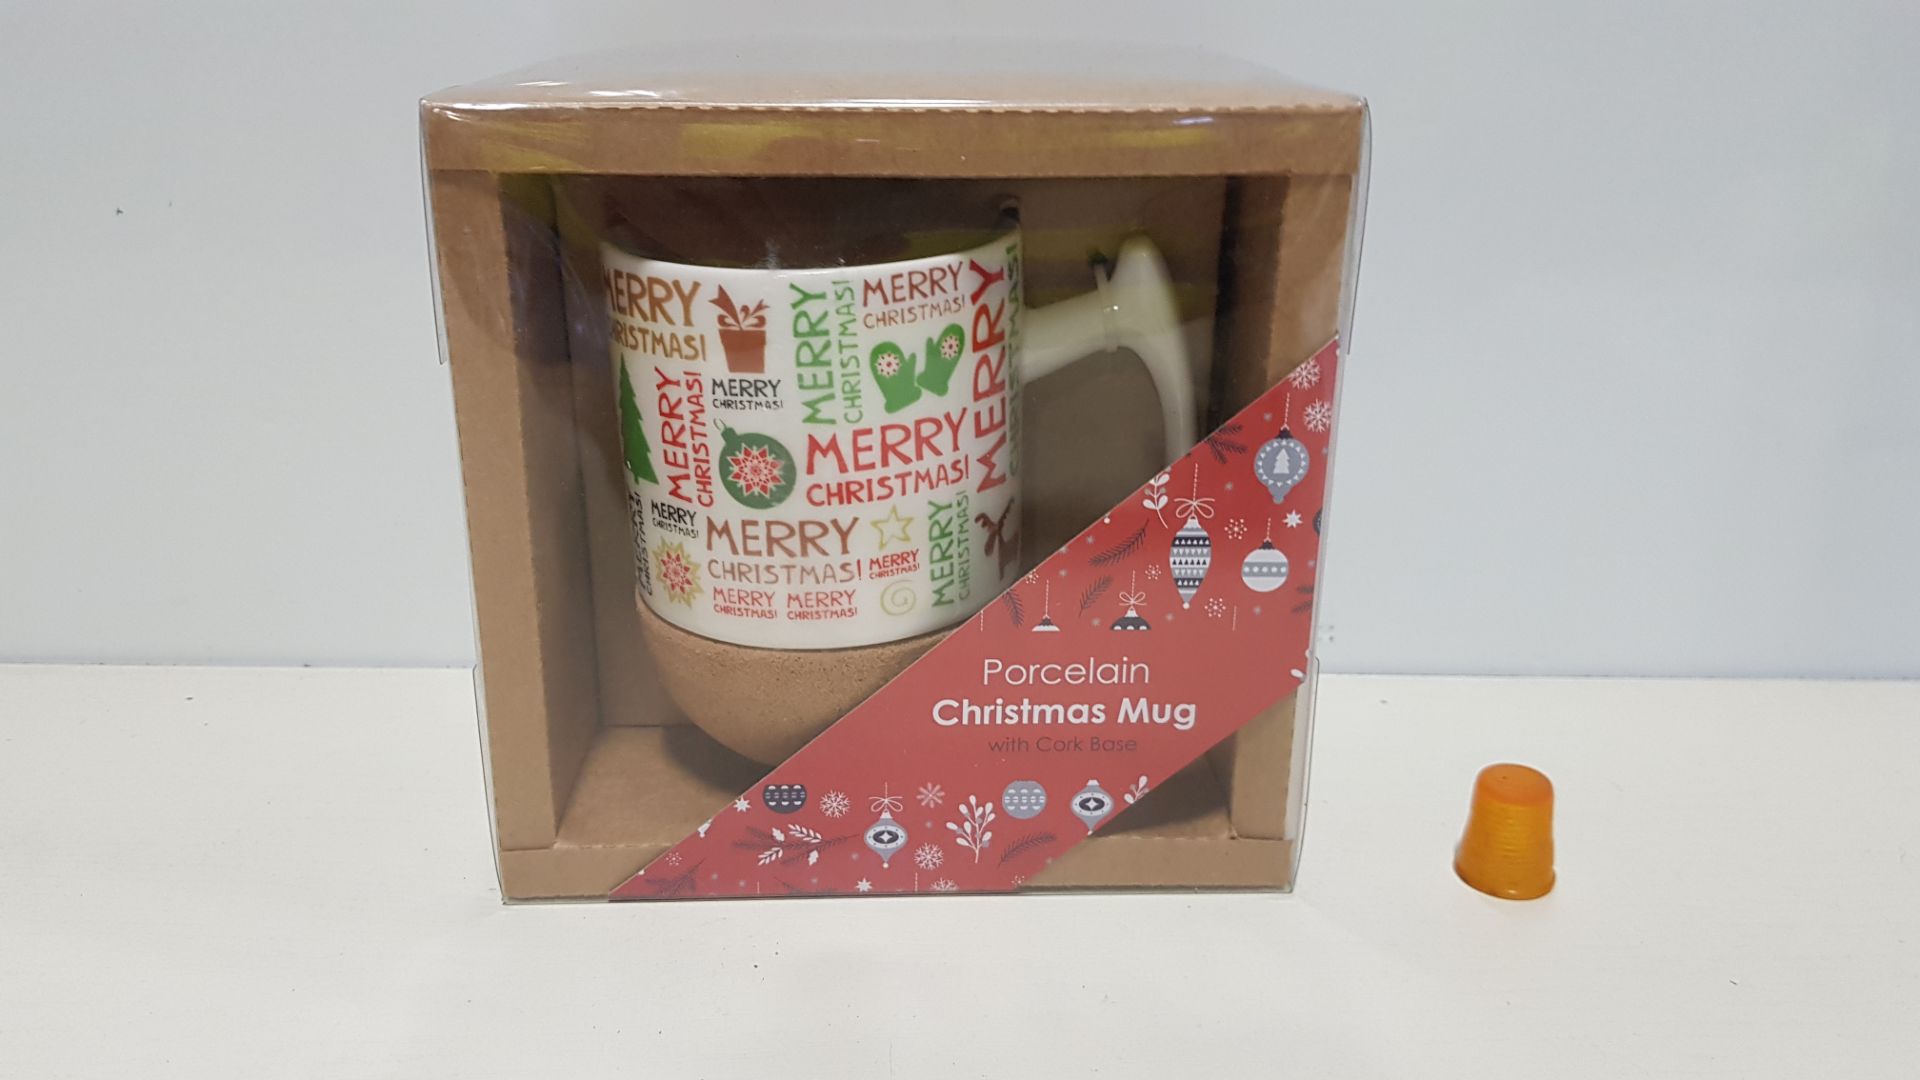 168 X BRAND NEW PORCELAIN CHRISTMAS MUG WITH CORK BASE - EACH CUP IN SEPARATE PACKAGING - ALL IN 7